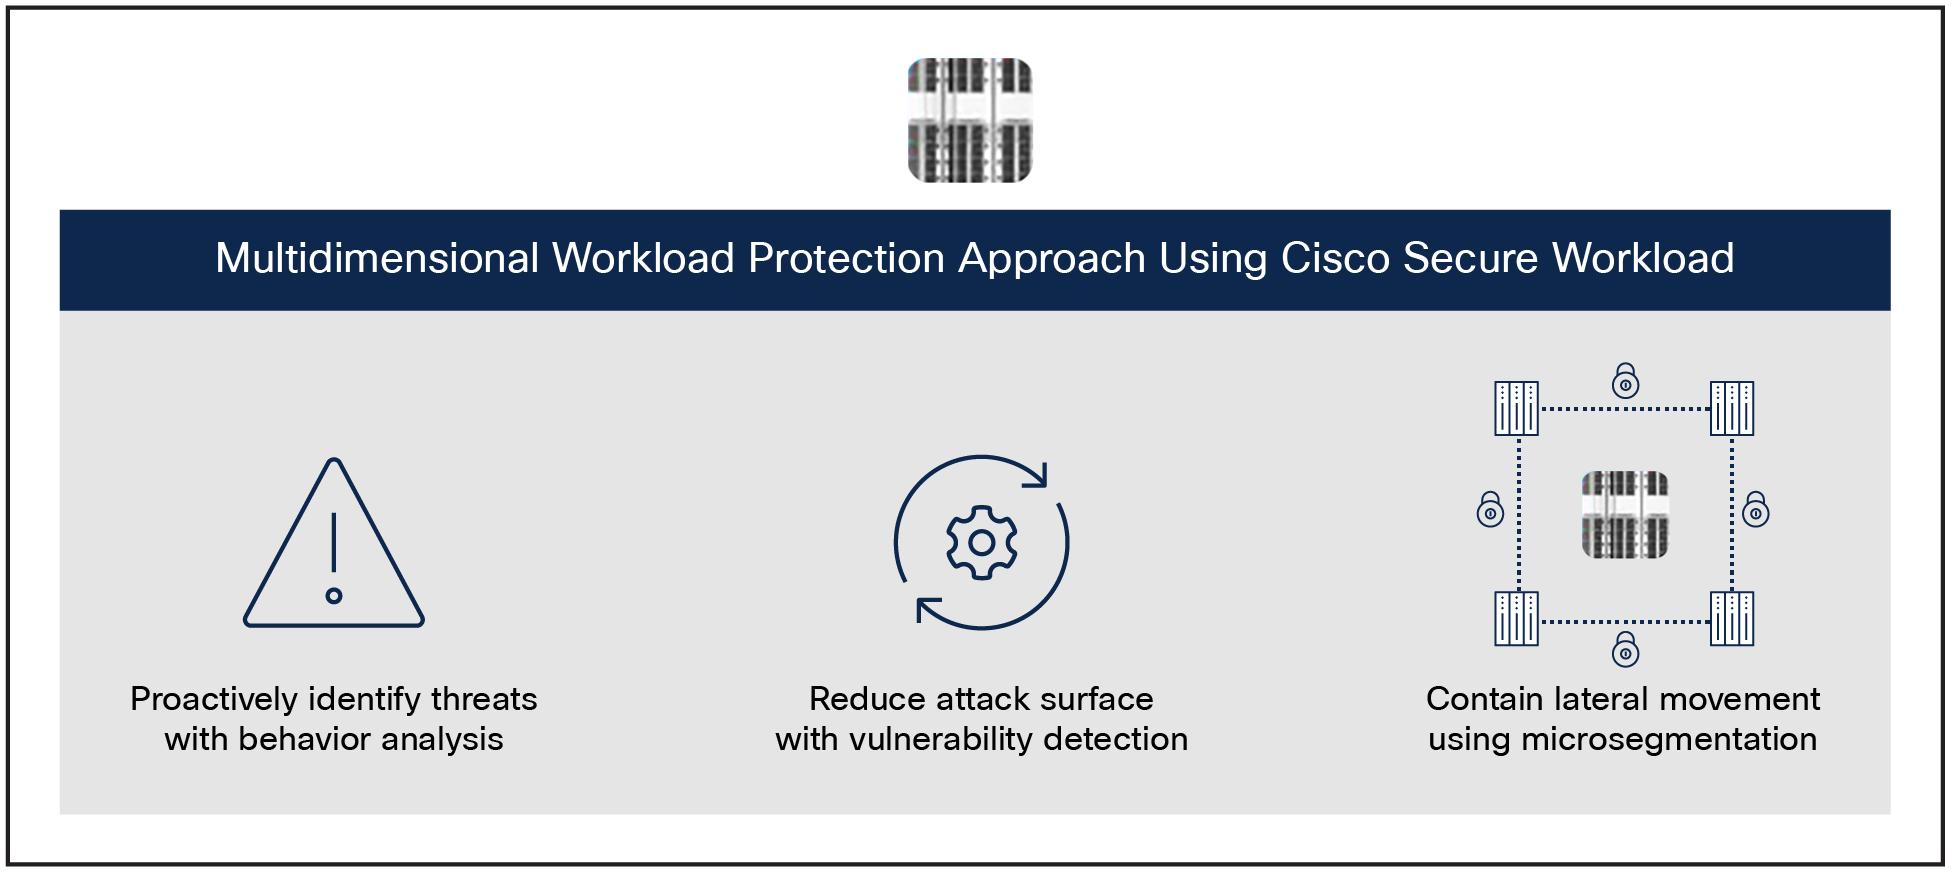 Multidimensional workload protection approach using Cisco Secure Workload